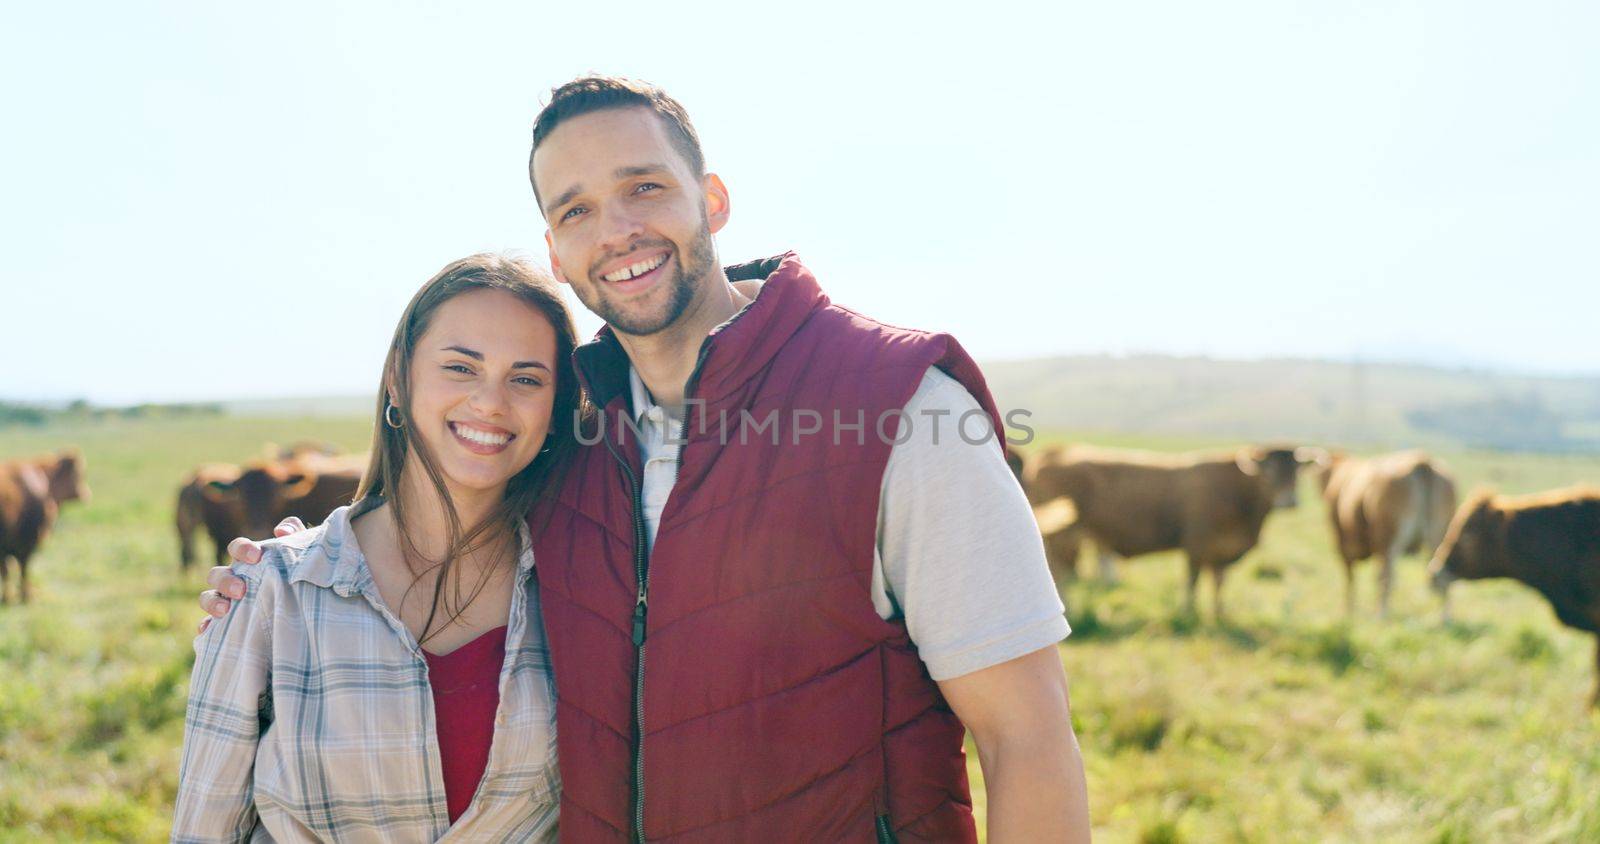 Cow, love and happy couple on a cattle farm hugging, bonding and enjoy quality time outdoors in nature. Smile, portrait and woman farming cows and harvesting animal livestock with a farmer on field.